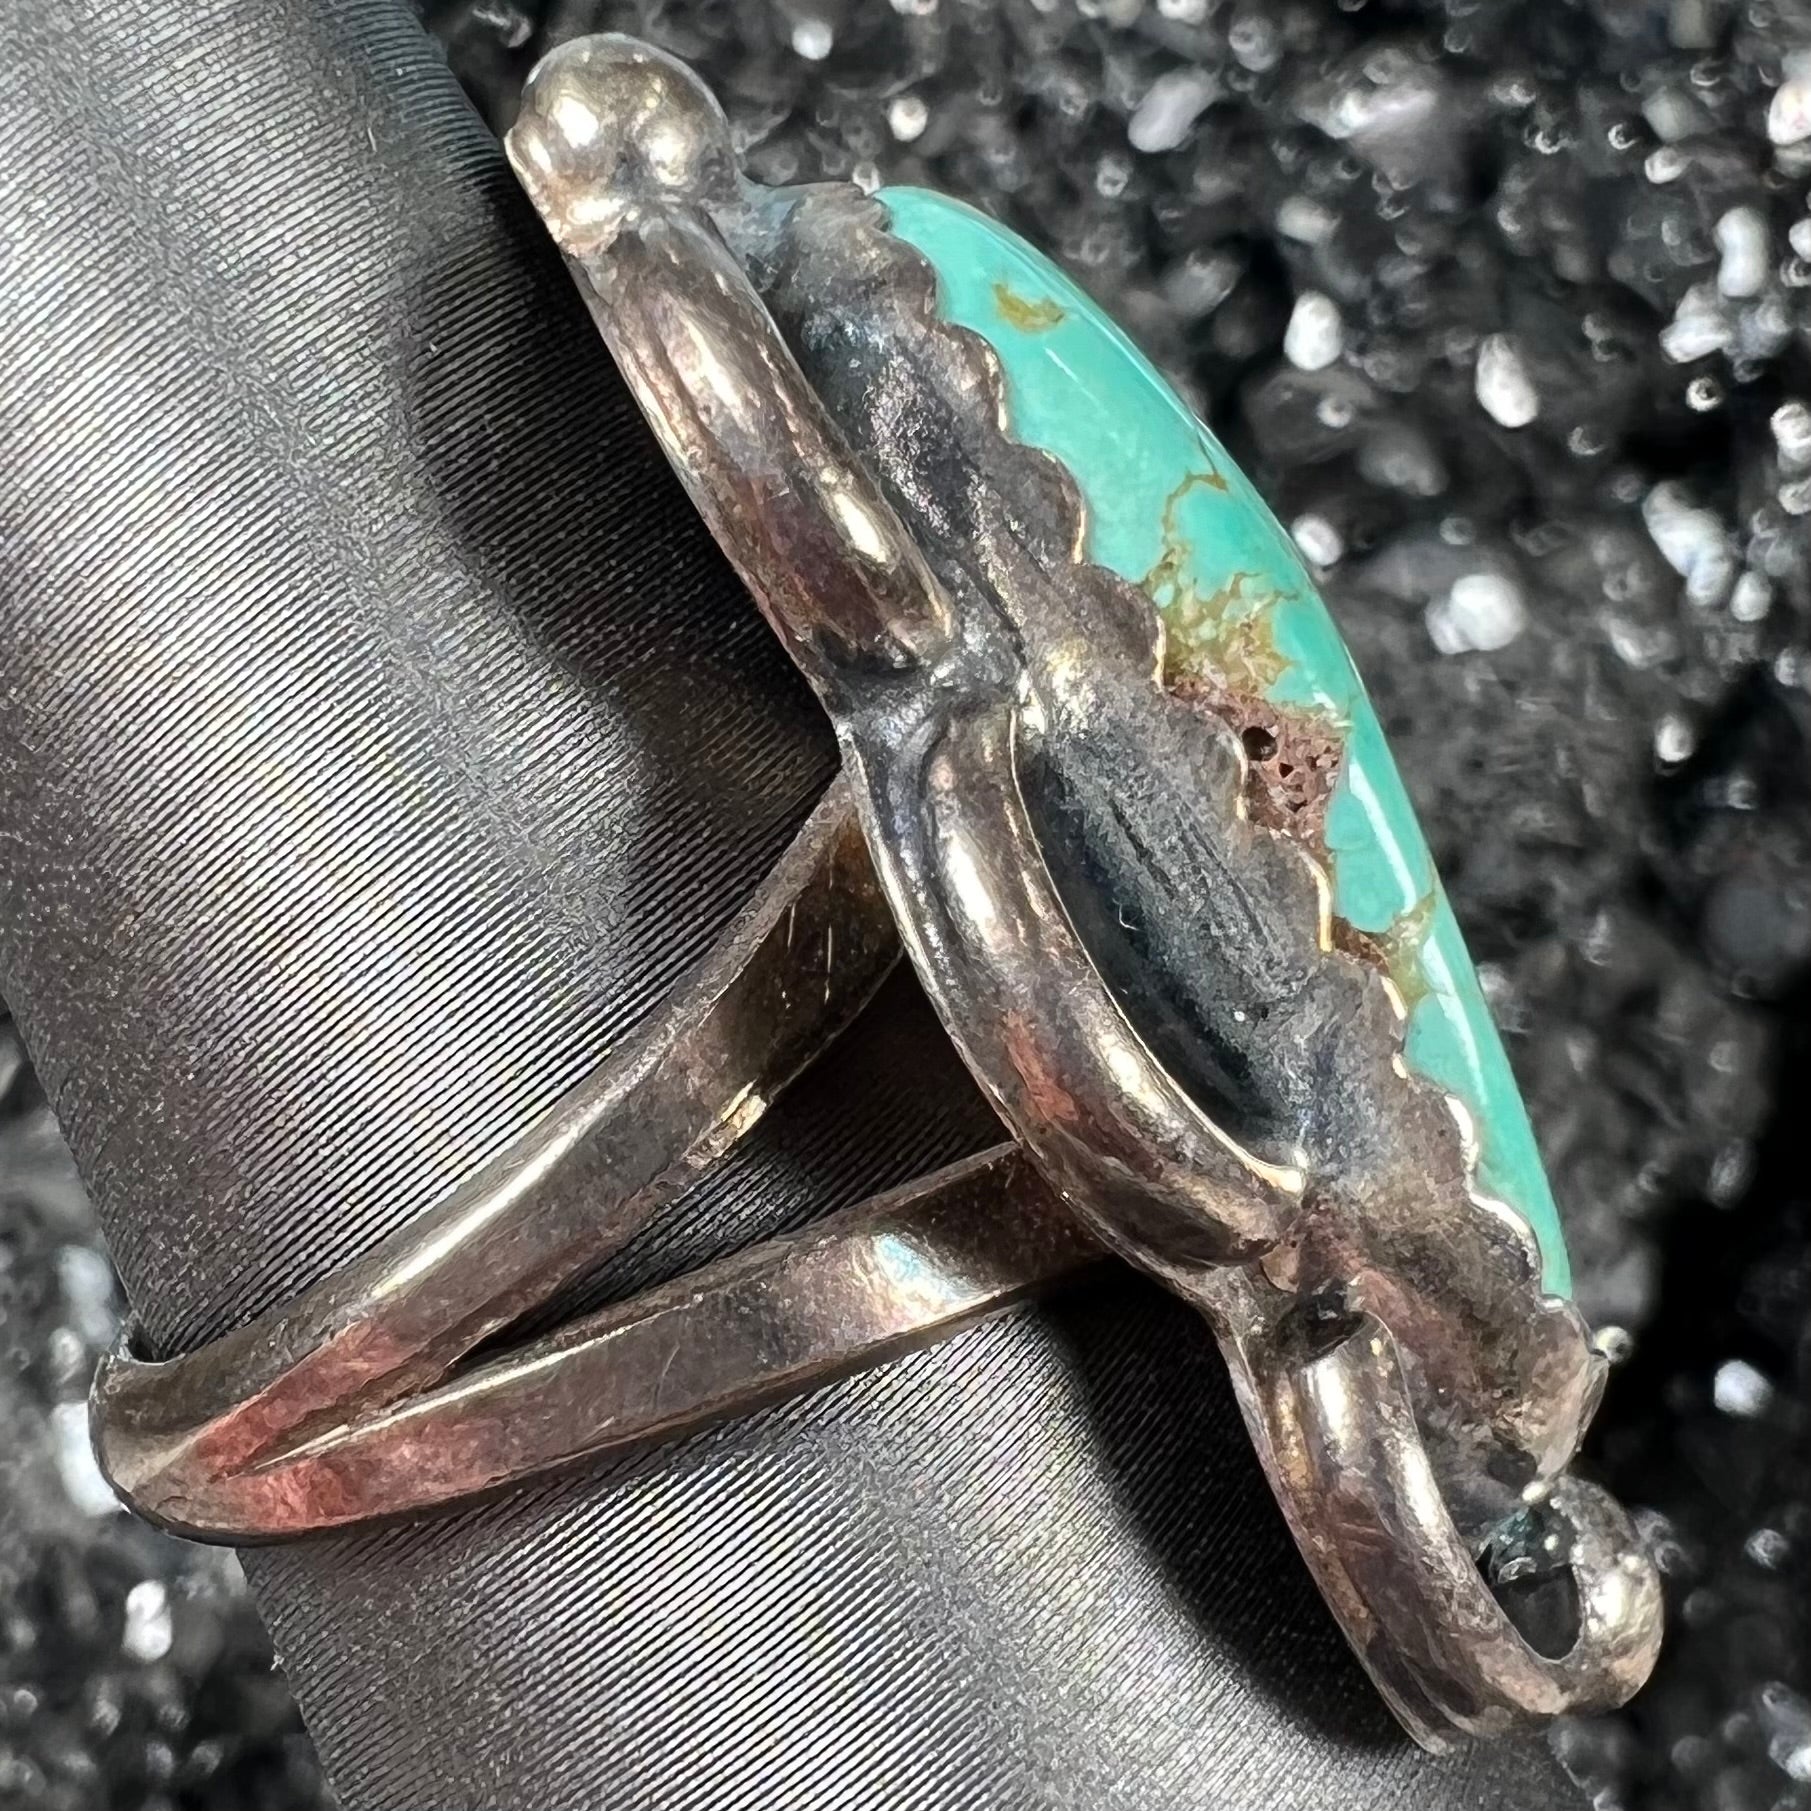 An estate sterling silver turquoise ring.  The ring was handmade by Navajo artist, Roy Buck.